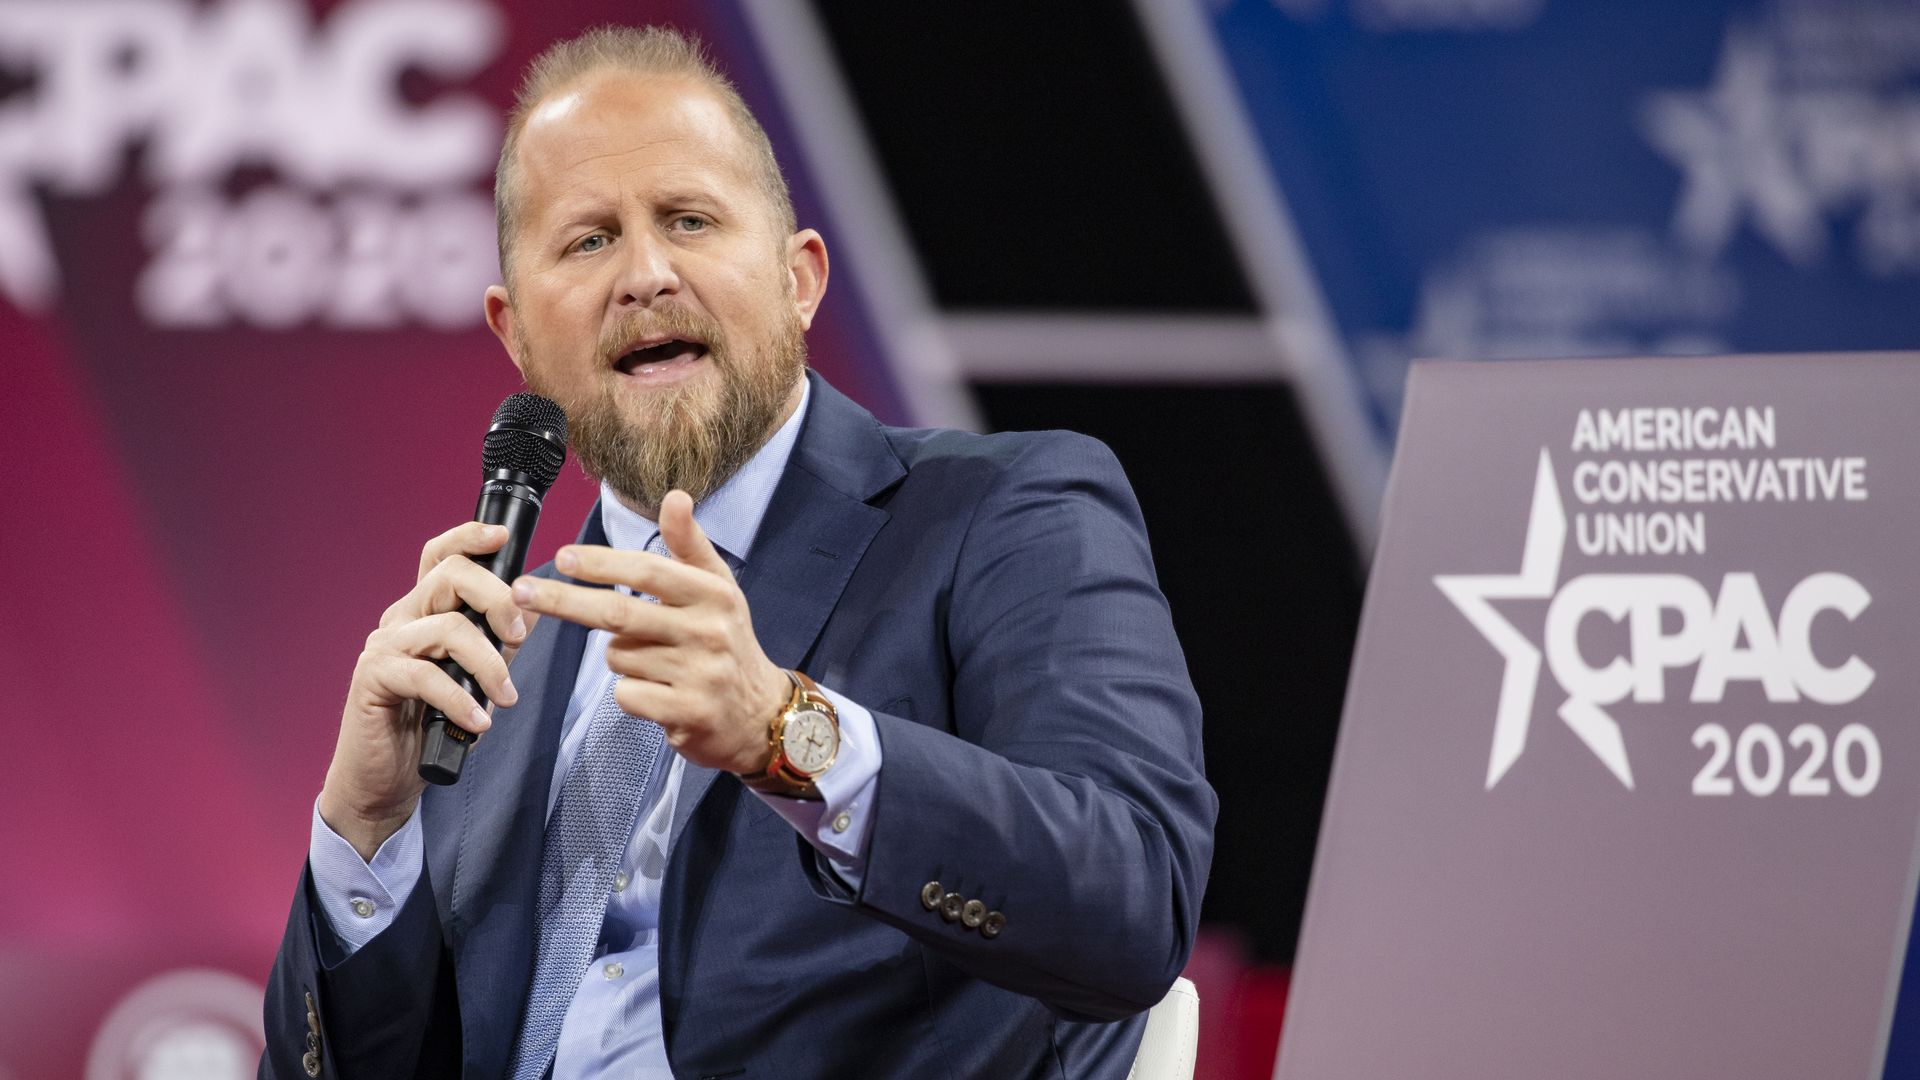 Brad Parscale, campaign manager for Trump's 2020 reelection campaign, speaks on stageduring the Conservative Political Action Conference 2020 